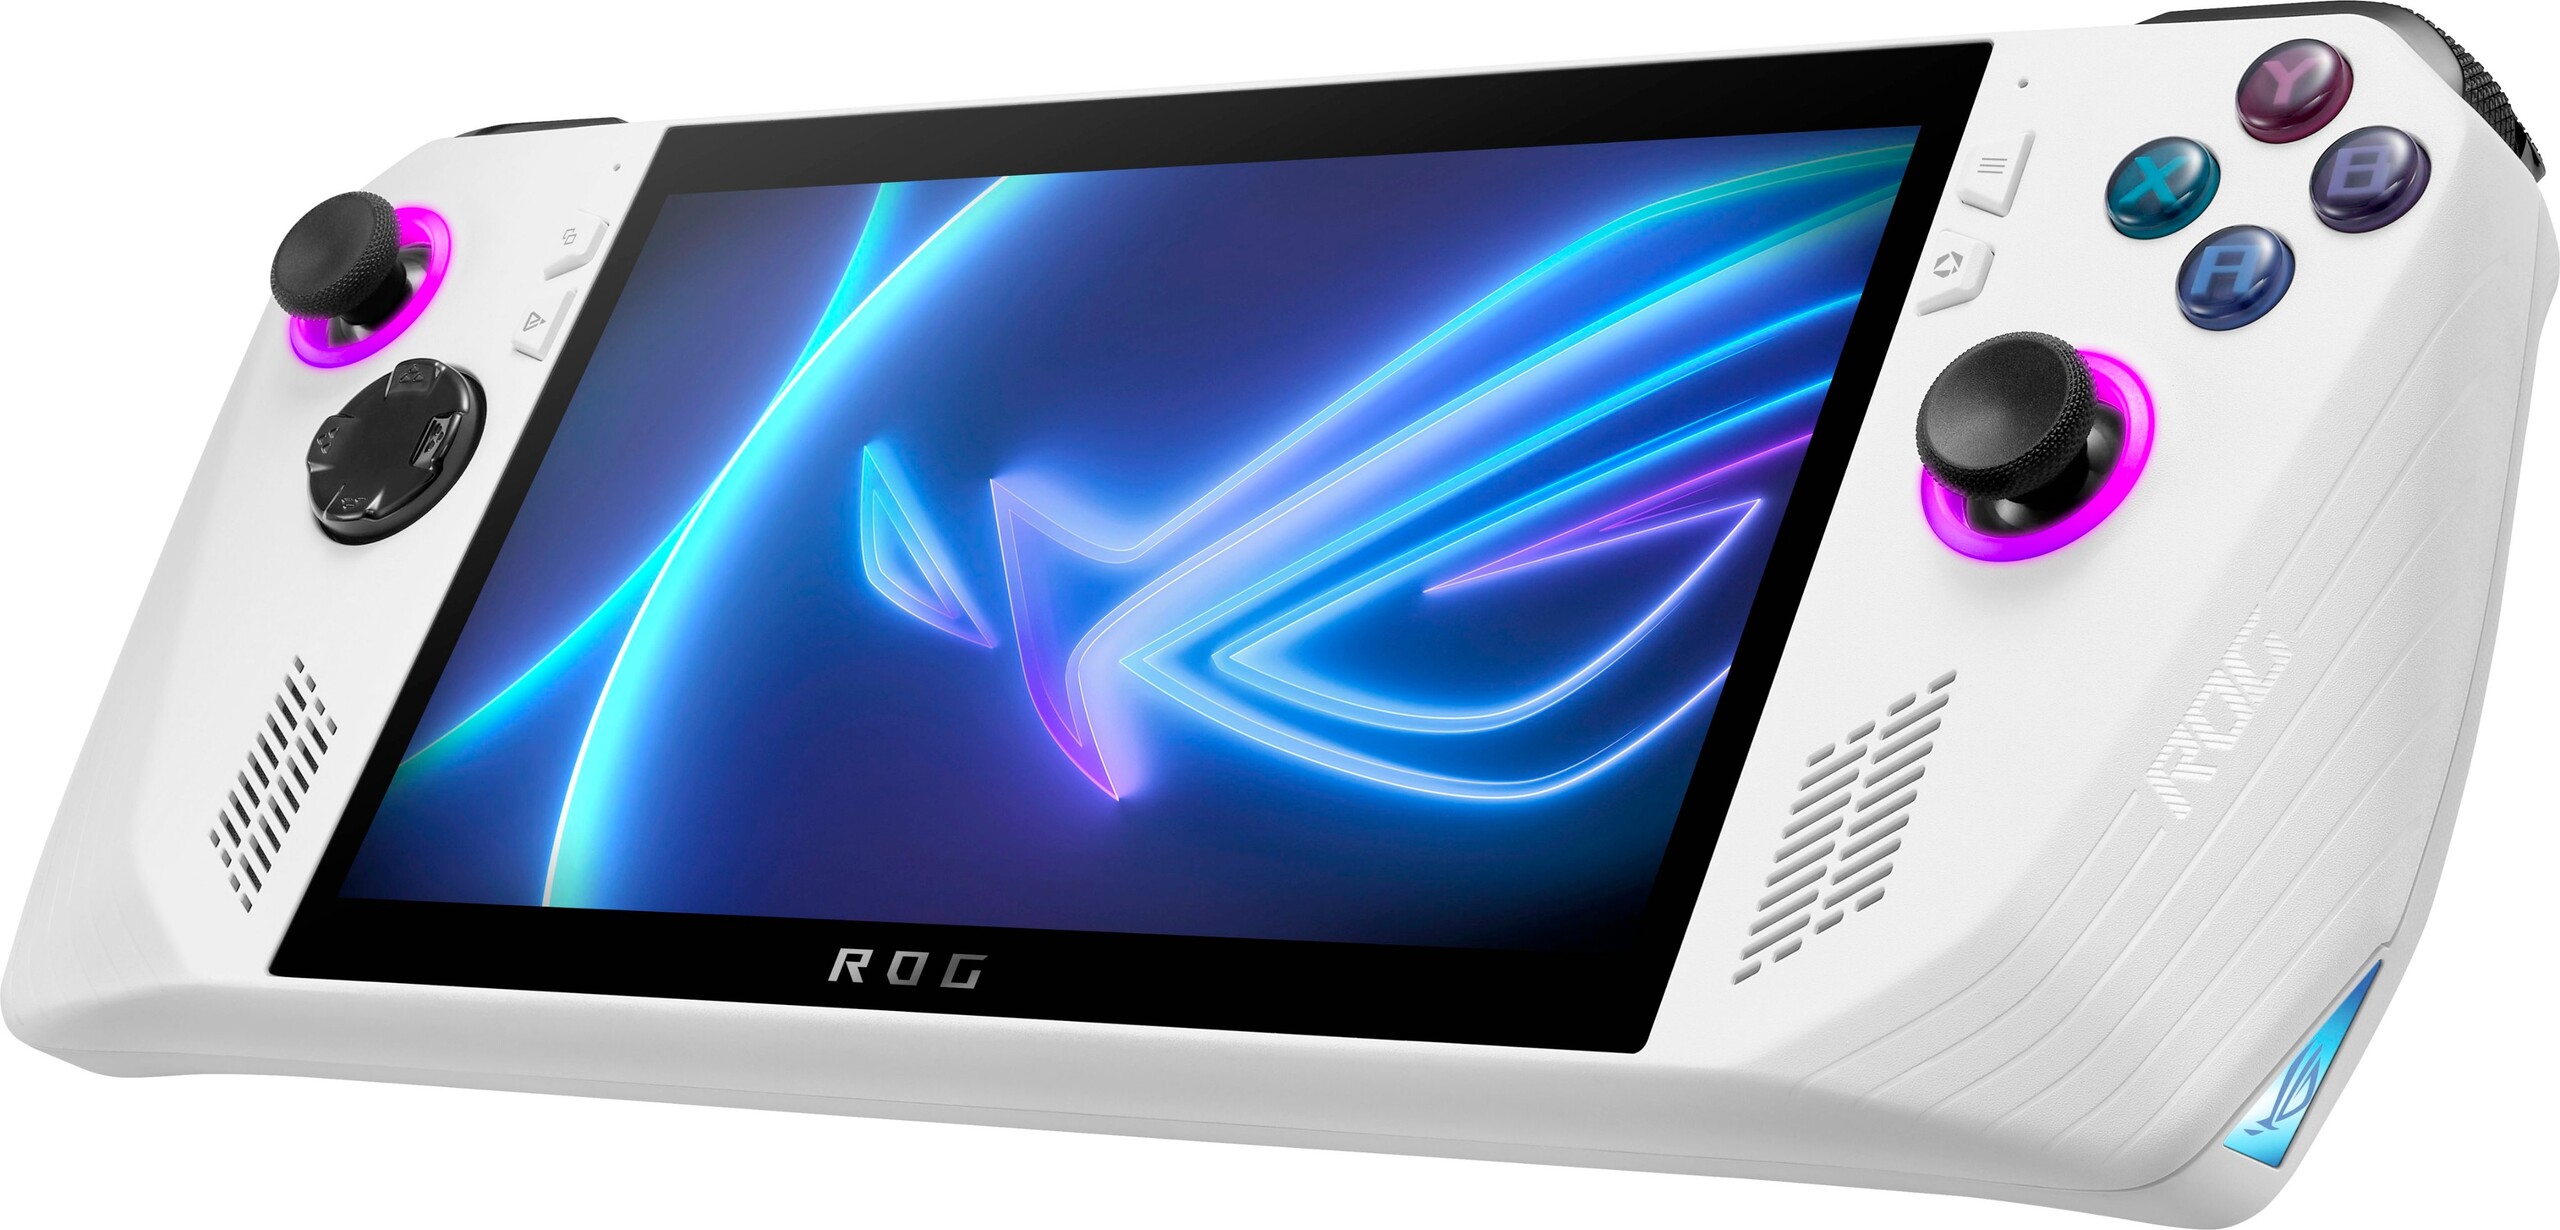 Asus ROG Ally Review: A stylish and powerful gaming handheld